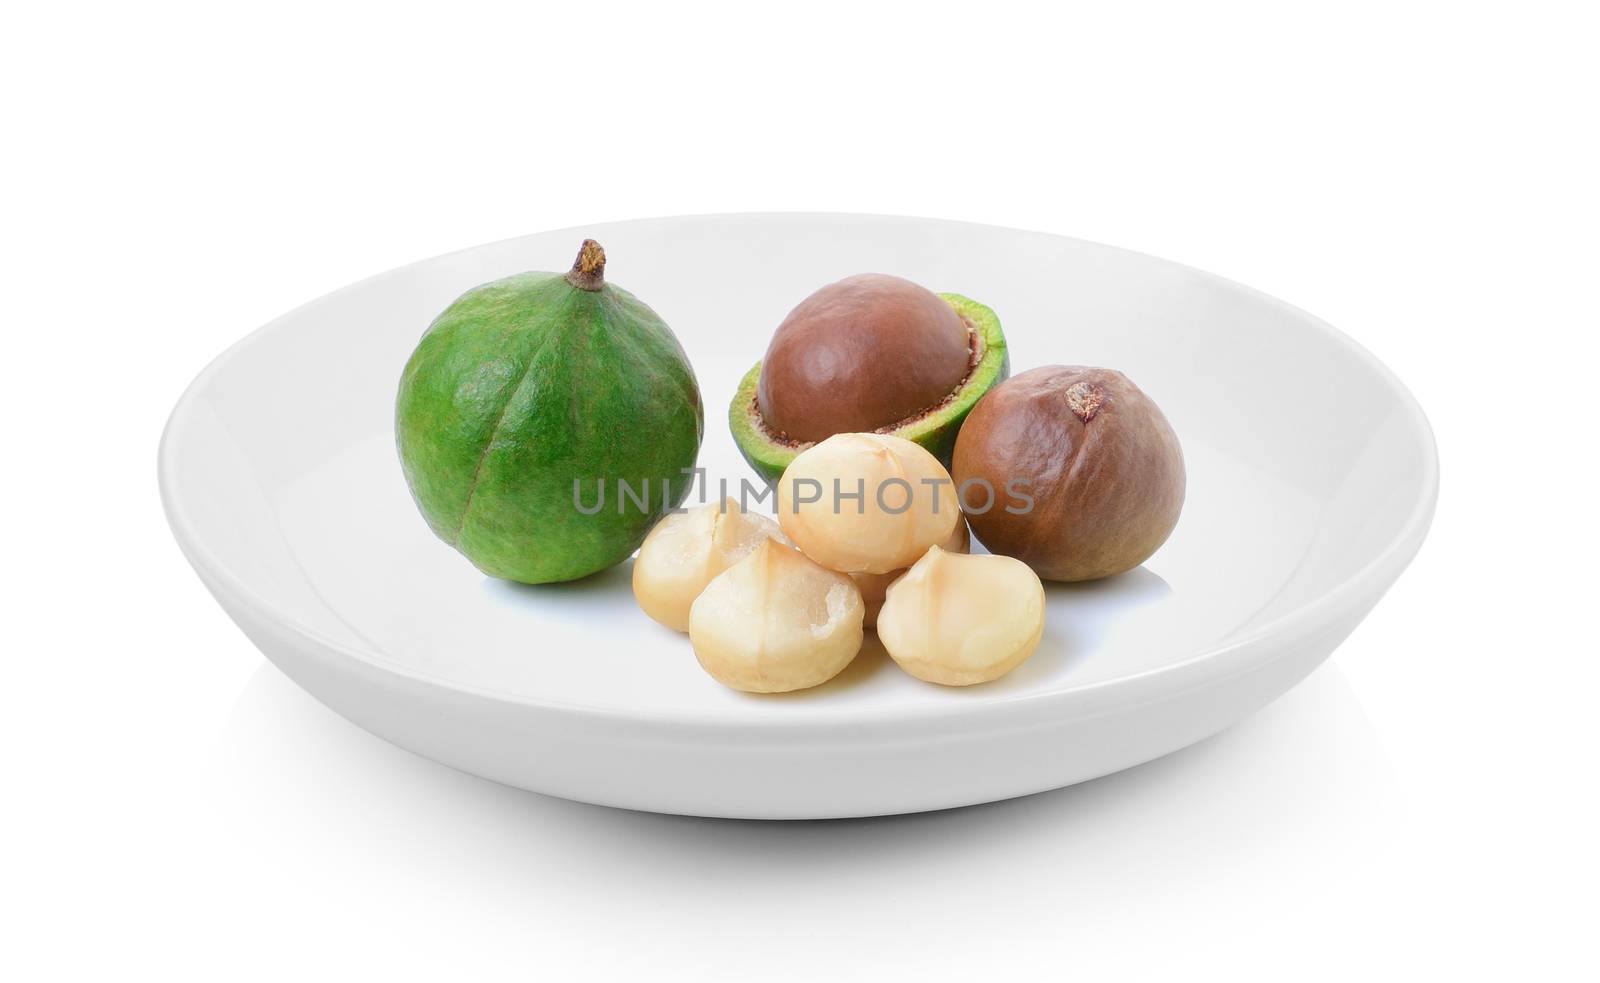 macadamia nuts in plate on white background